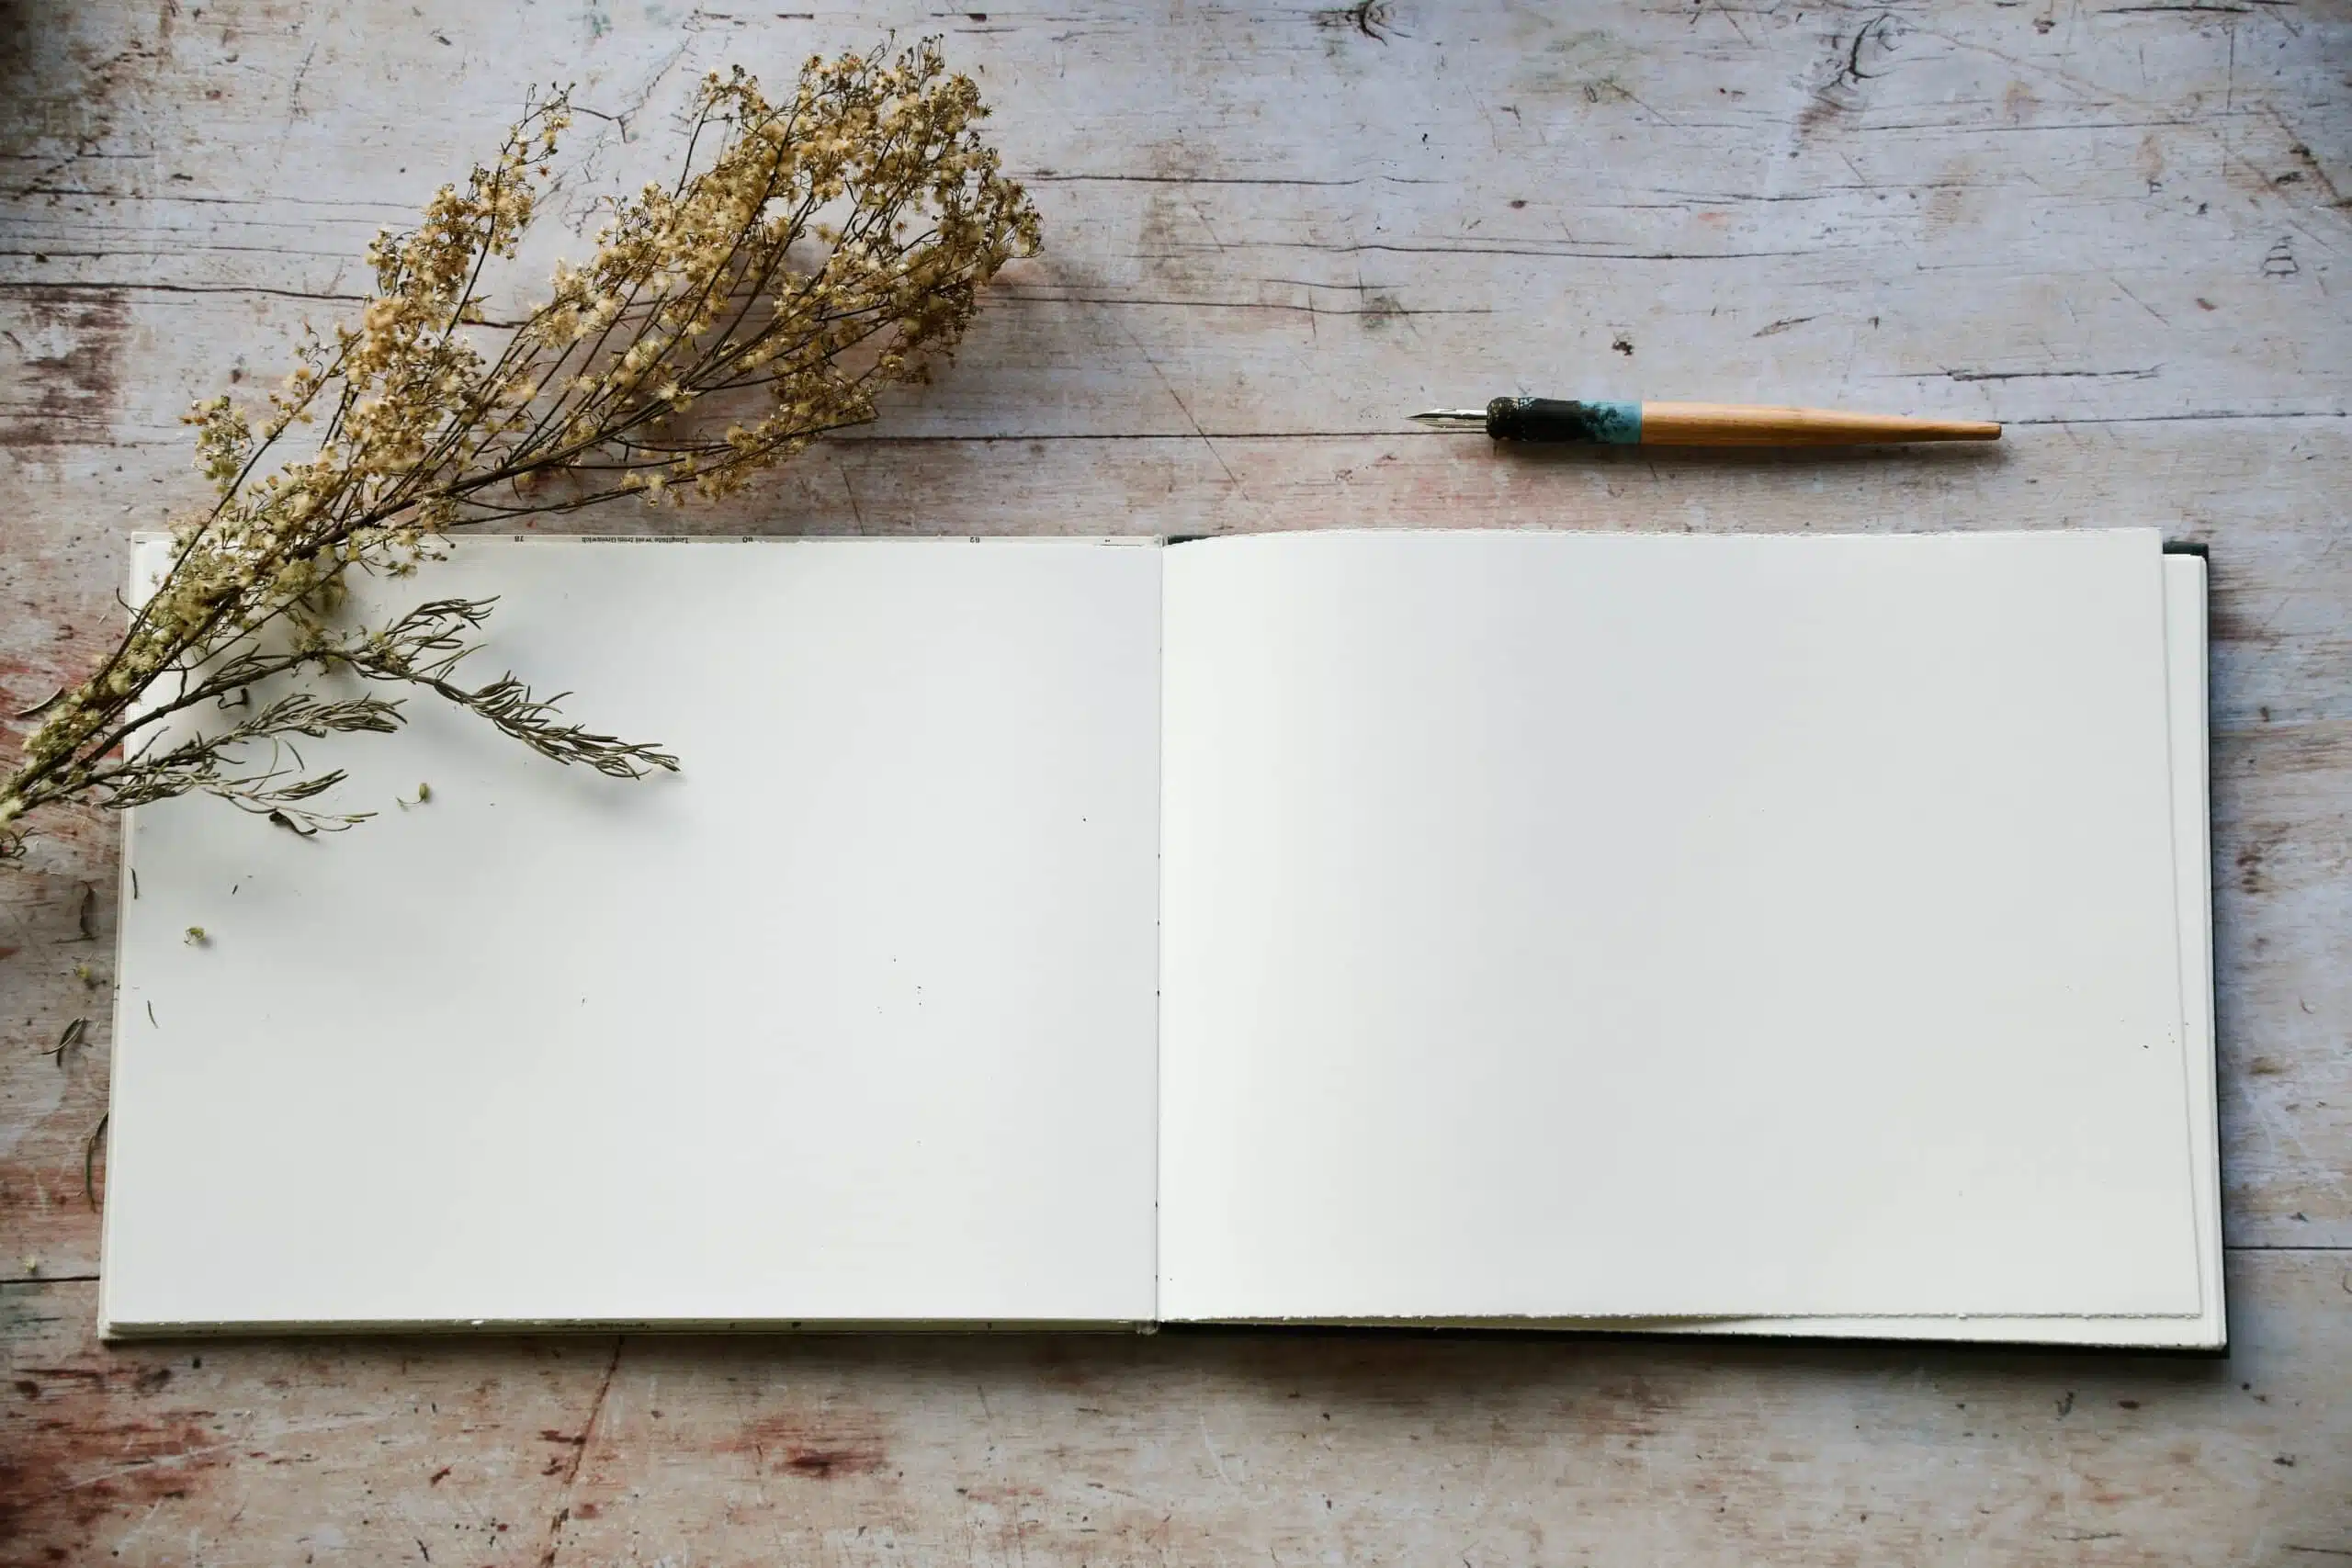 Blank journal open for creative writing or journaling